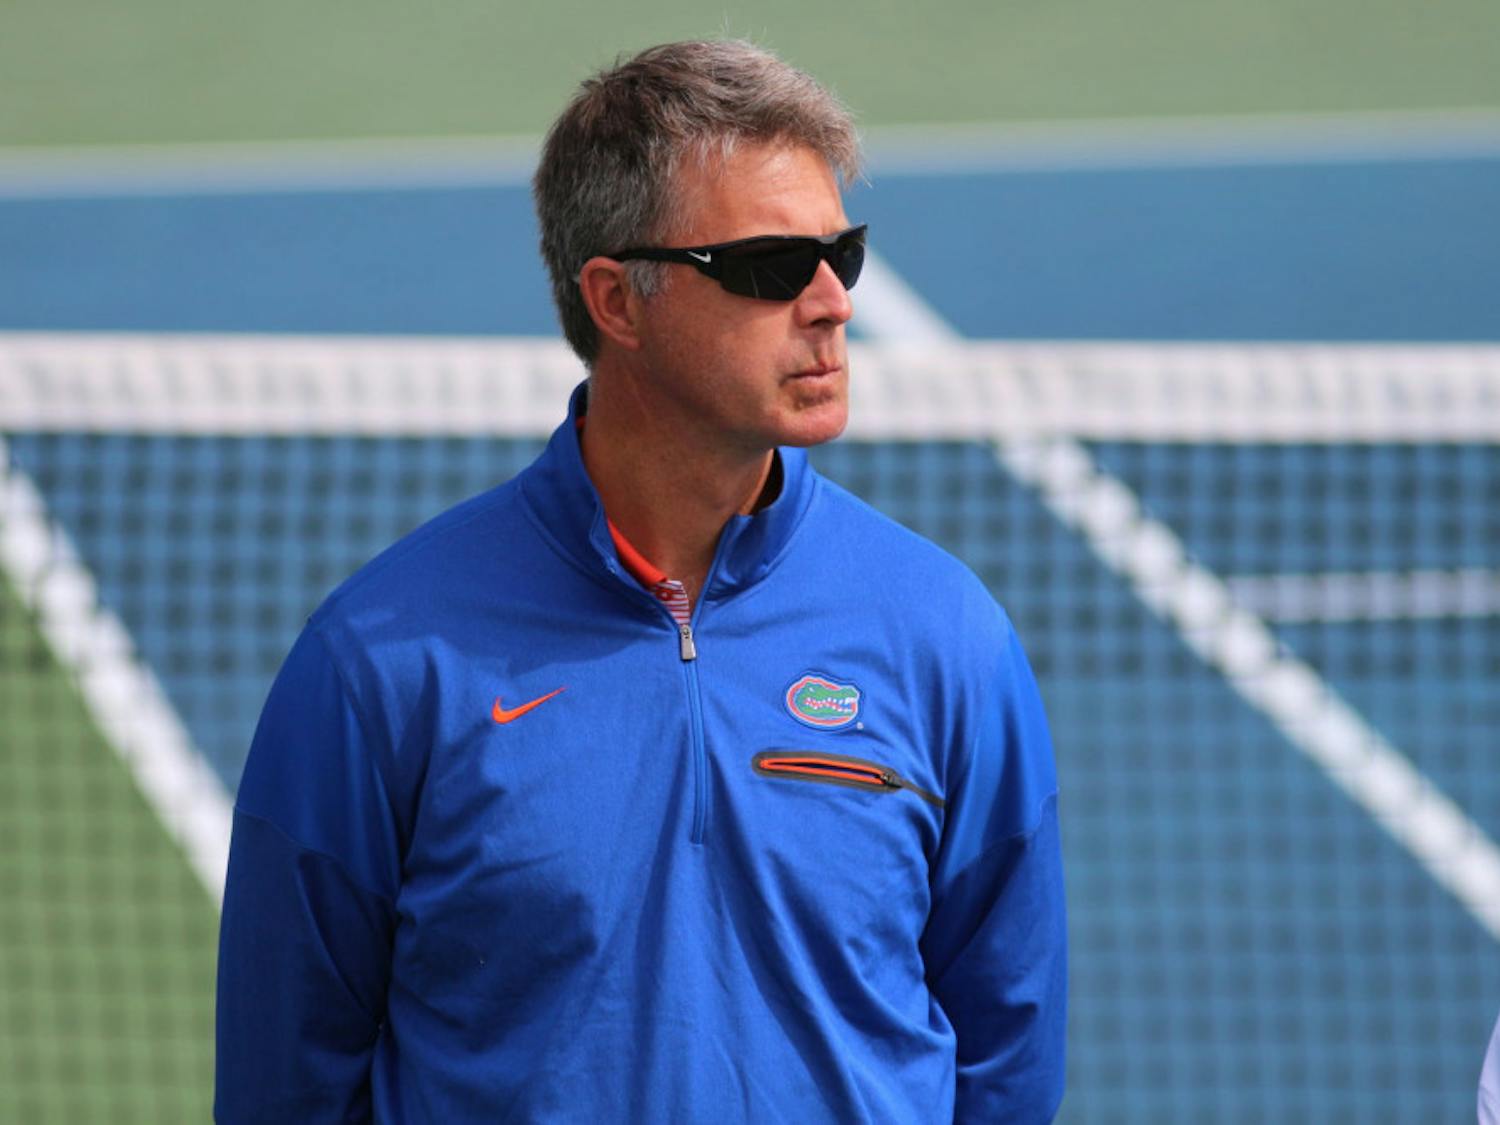 UF women's tennis coach Roland Thornqvist said the team is continuing to improve. “I thought at the beginning of this season with the youth we have and the first time in this league that we were going to have a lot of growing pains, " he said. ". . . but it's getting better and that was our message in the (locker room).”